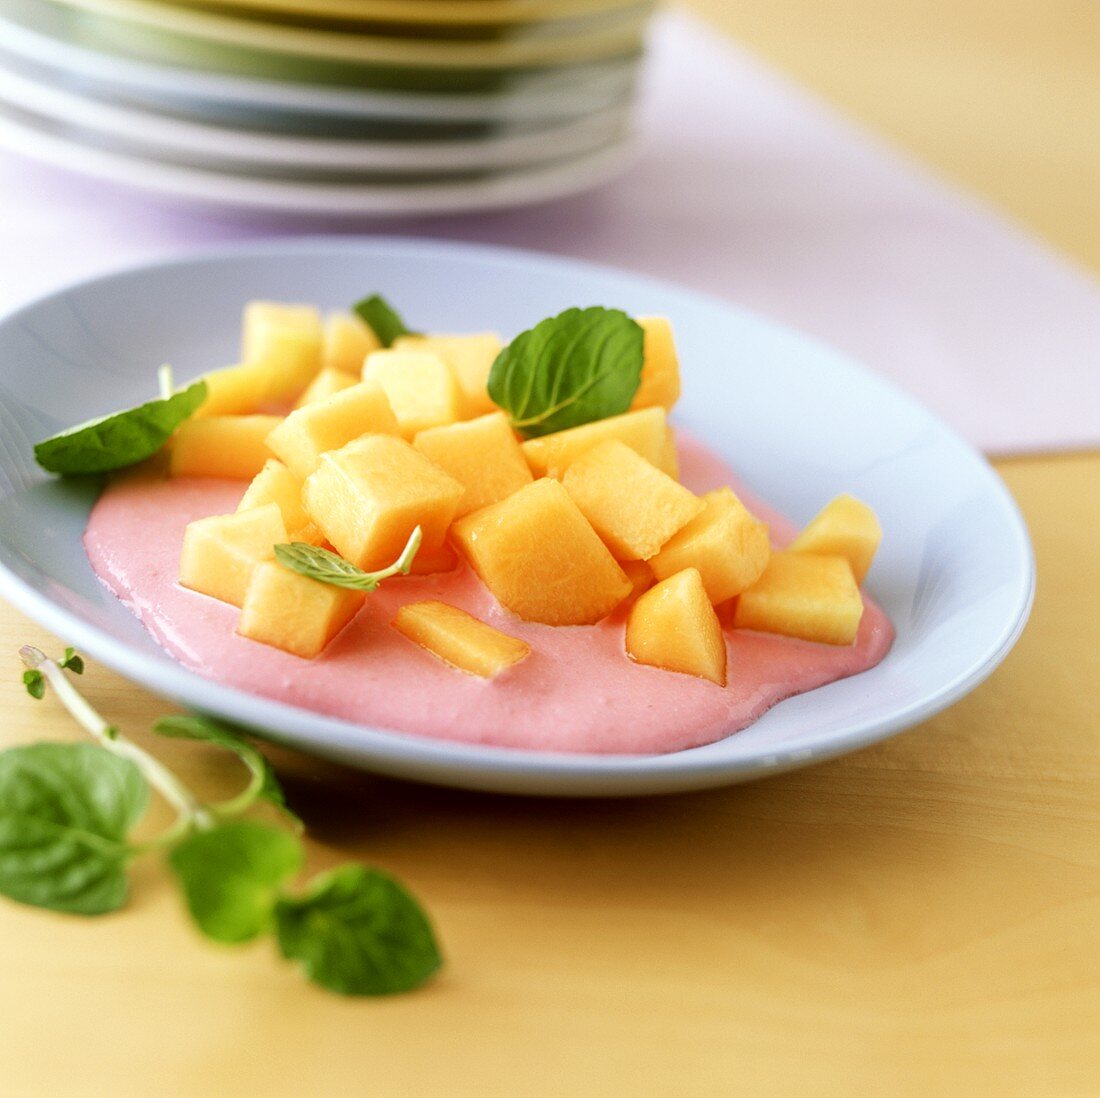 Cantaloupe-Melone mit Himbeersauce